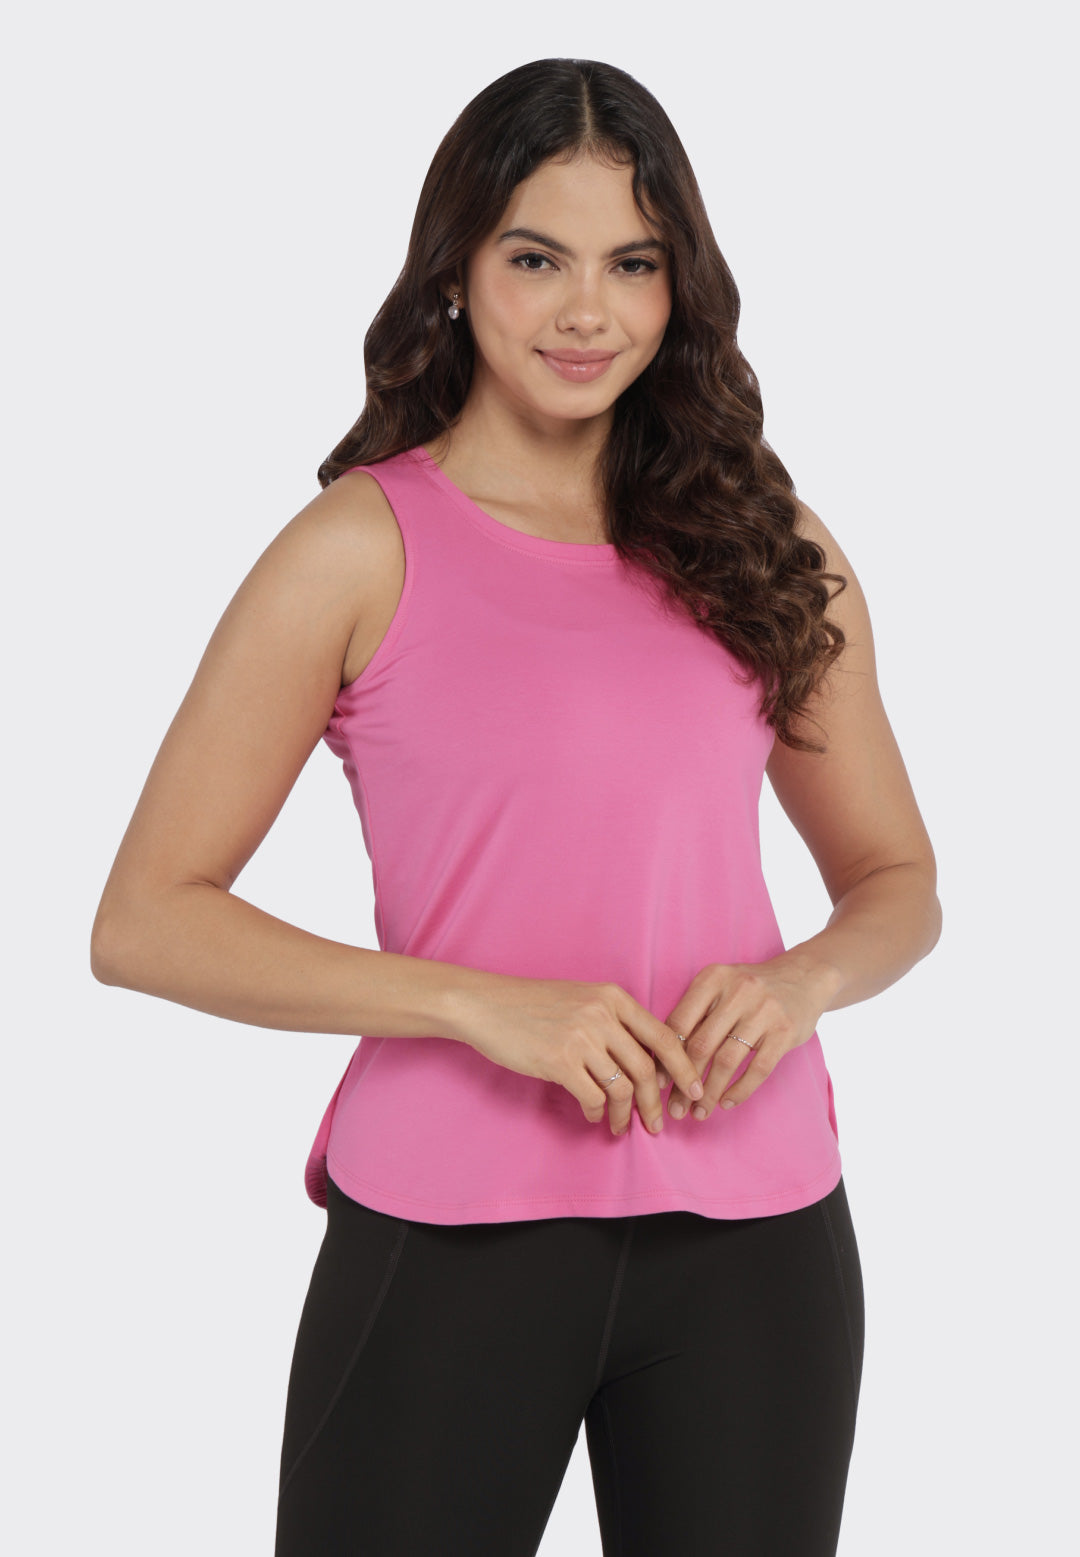 Women's Sleeveless Tops Compression Shirt Invisible Bras Padded